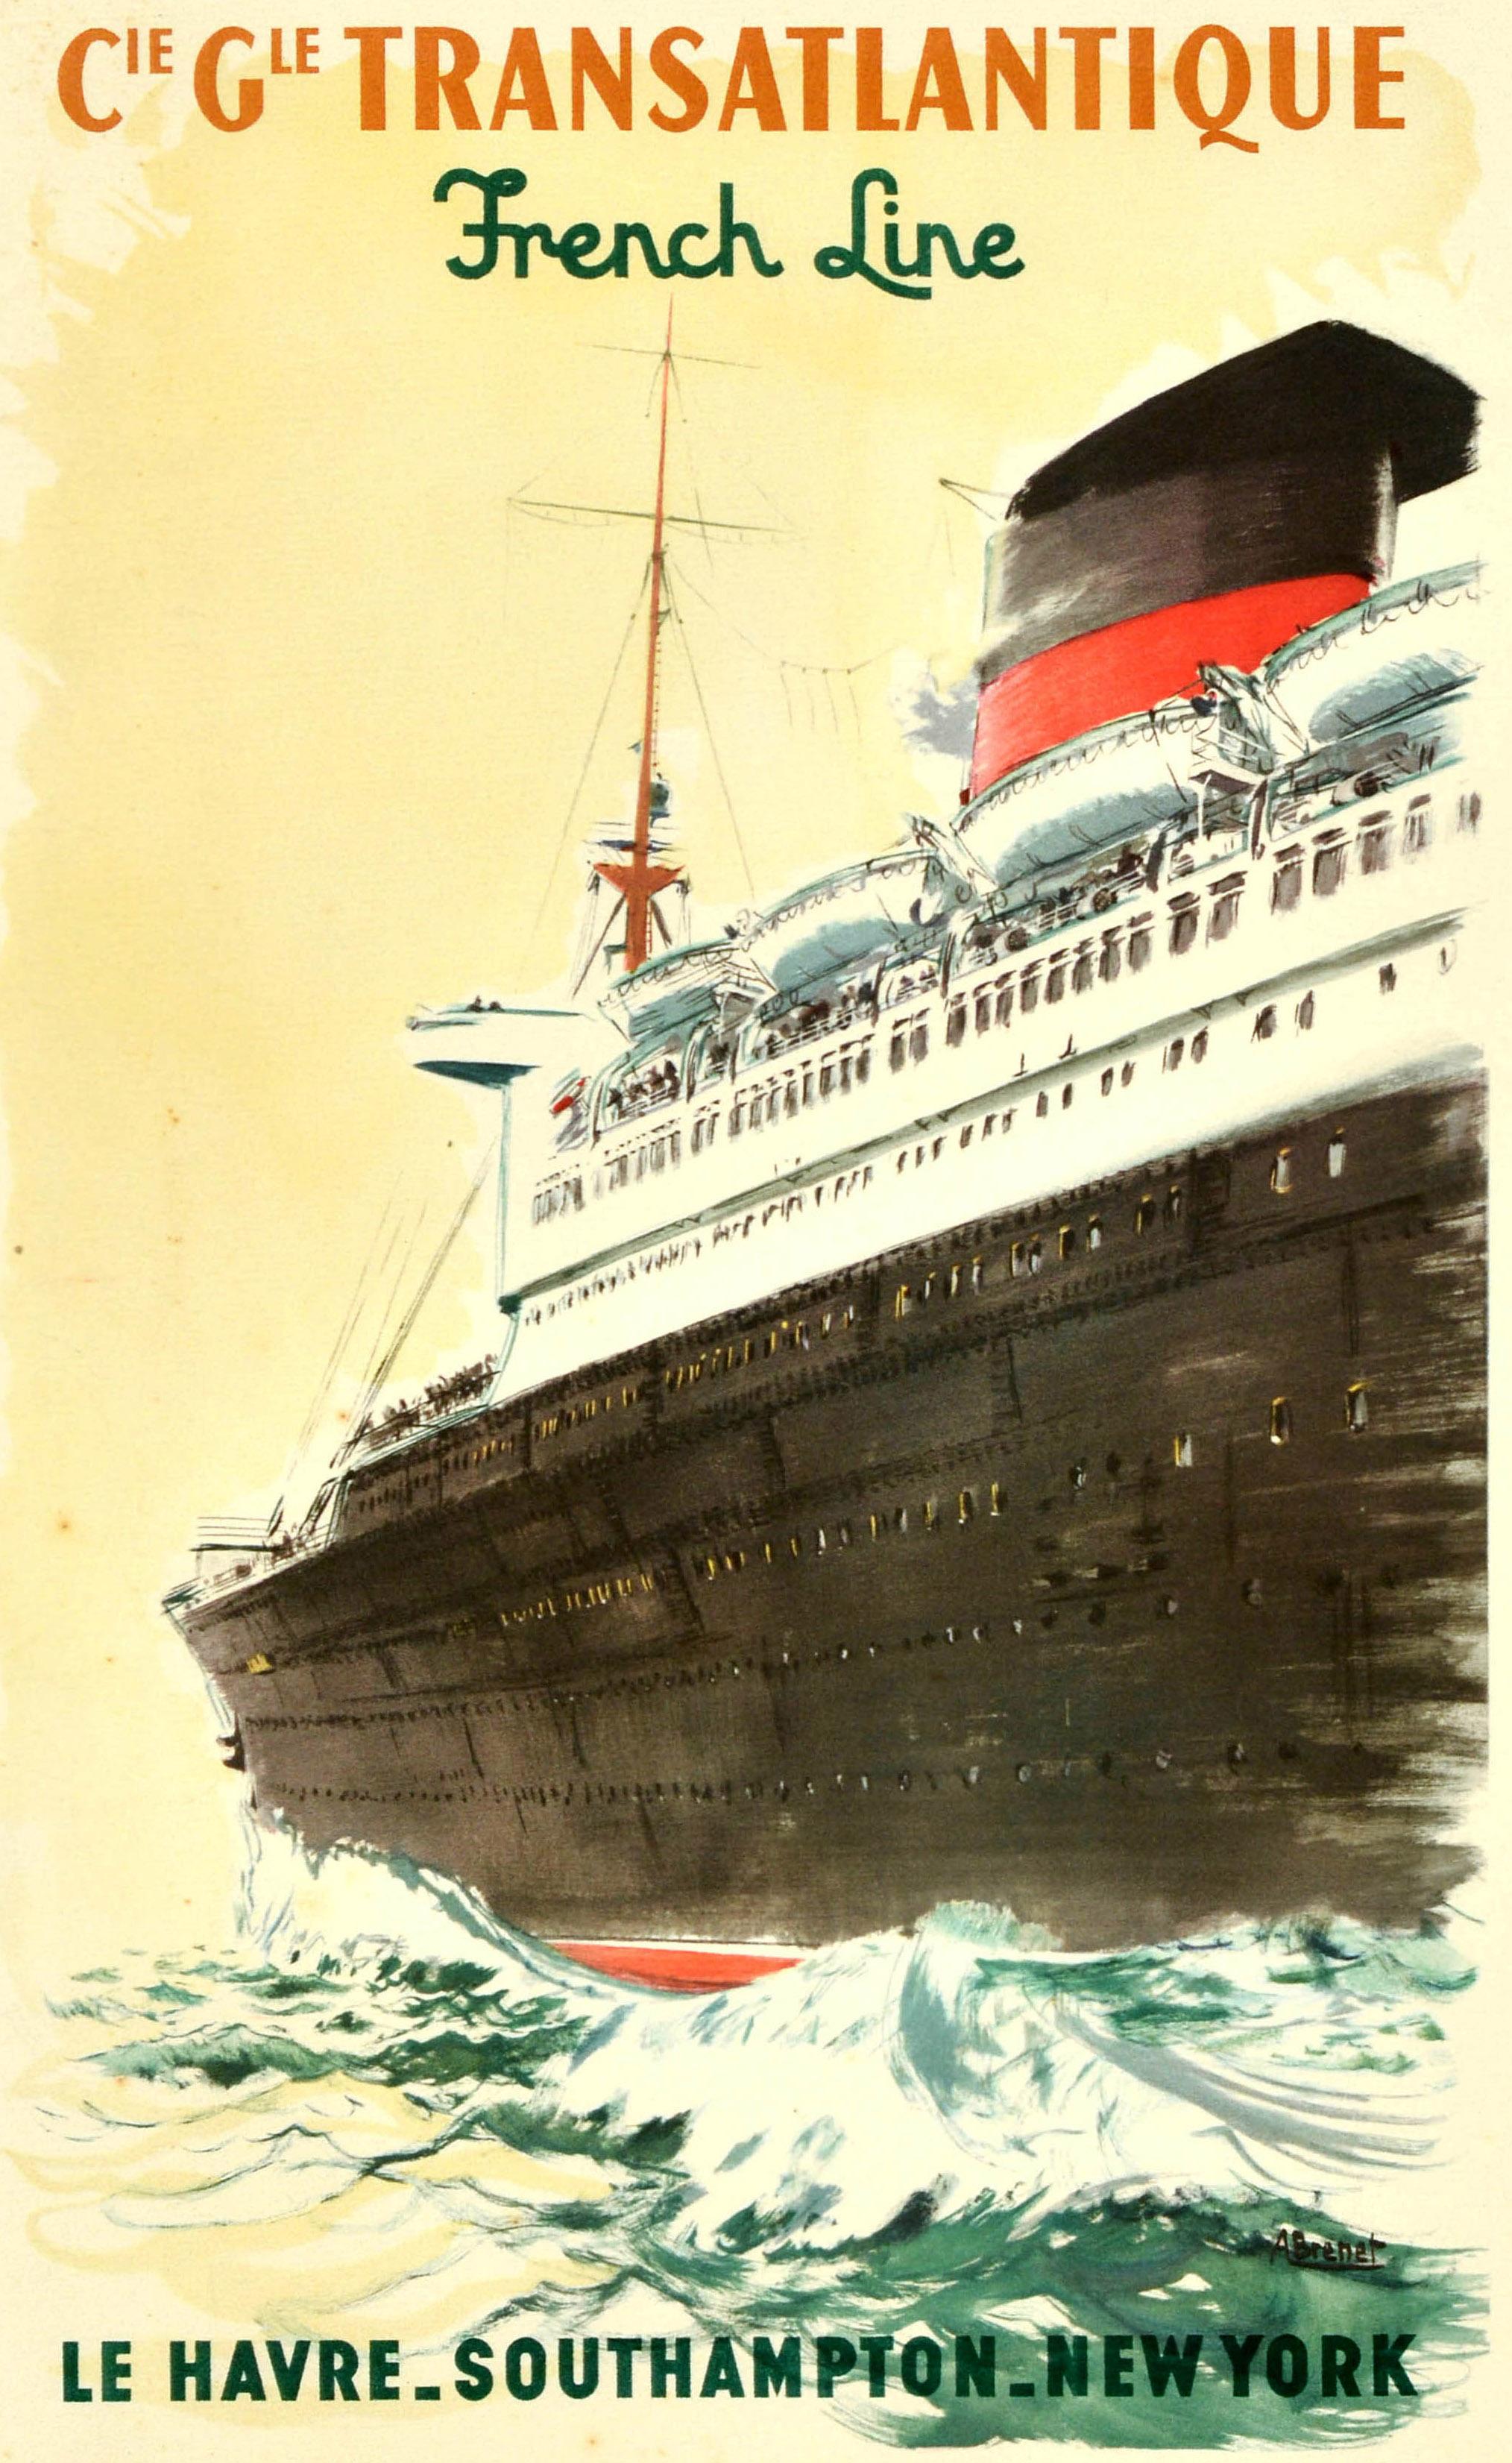 Original vintage cruise travel poster - Cie Gle Transatlantique French Line Le Havre Southampton New York - featuring artwork by the French artist Albert Brenet (1903-2005) depicting an ocean liner sailing at sea with the stylised title text above